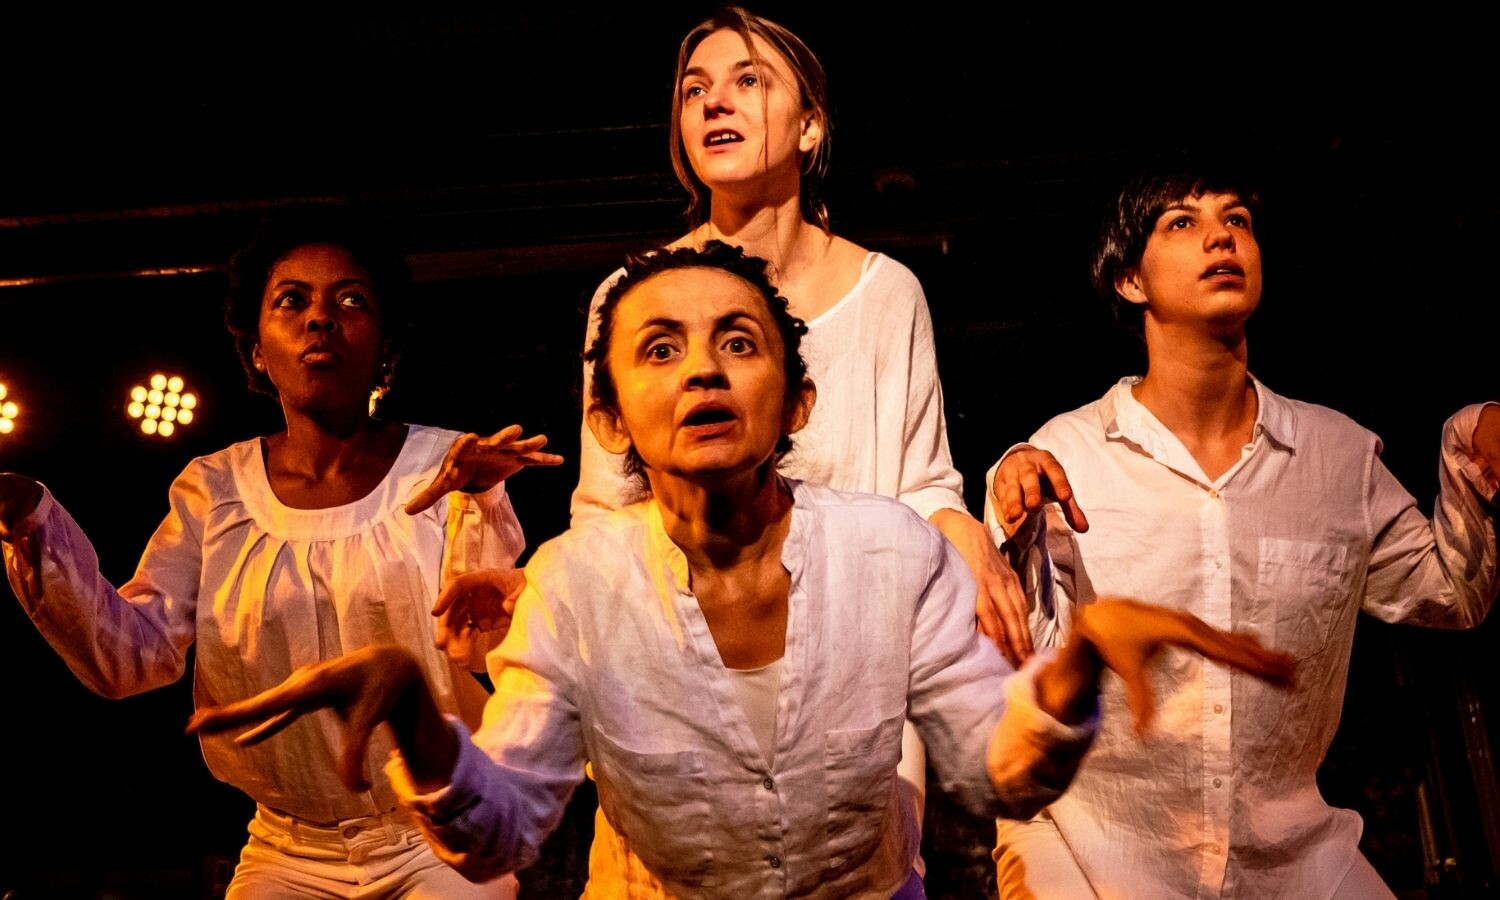 Four actresses, dressed in white, making delirious facial expressions and flopping their wrists downward with their fingers hanging freely.